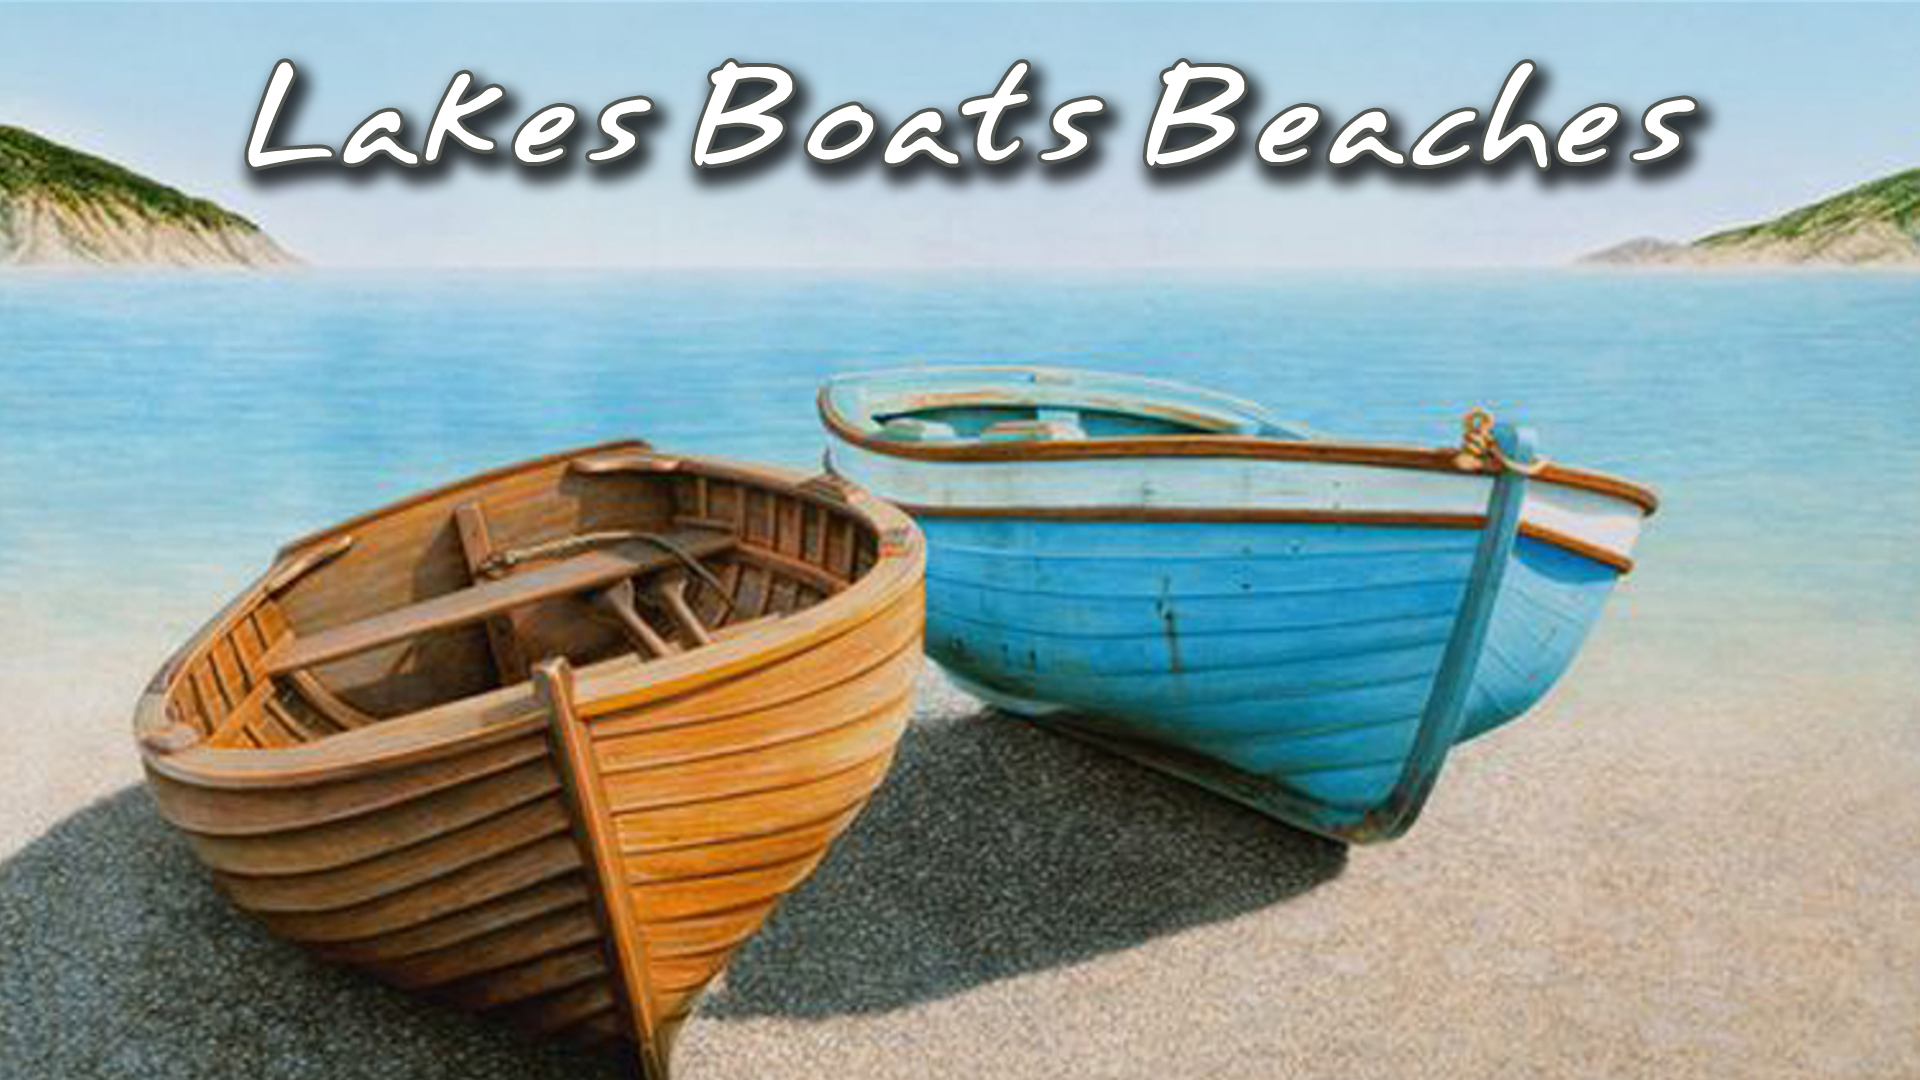 Lakes Boats Beaches – Does Jesus even care?